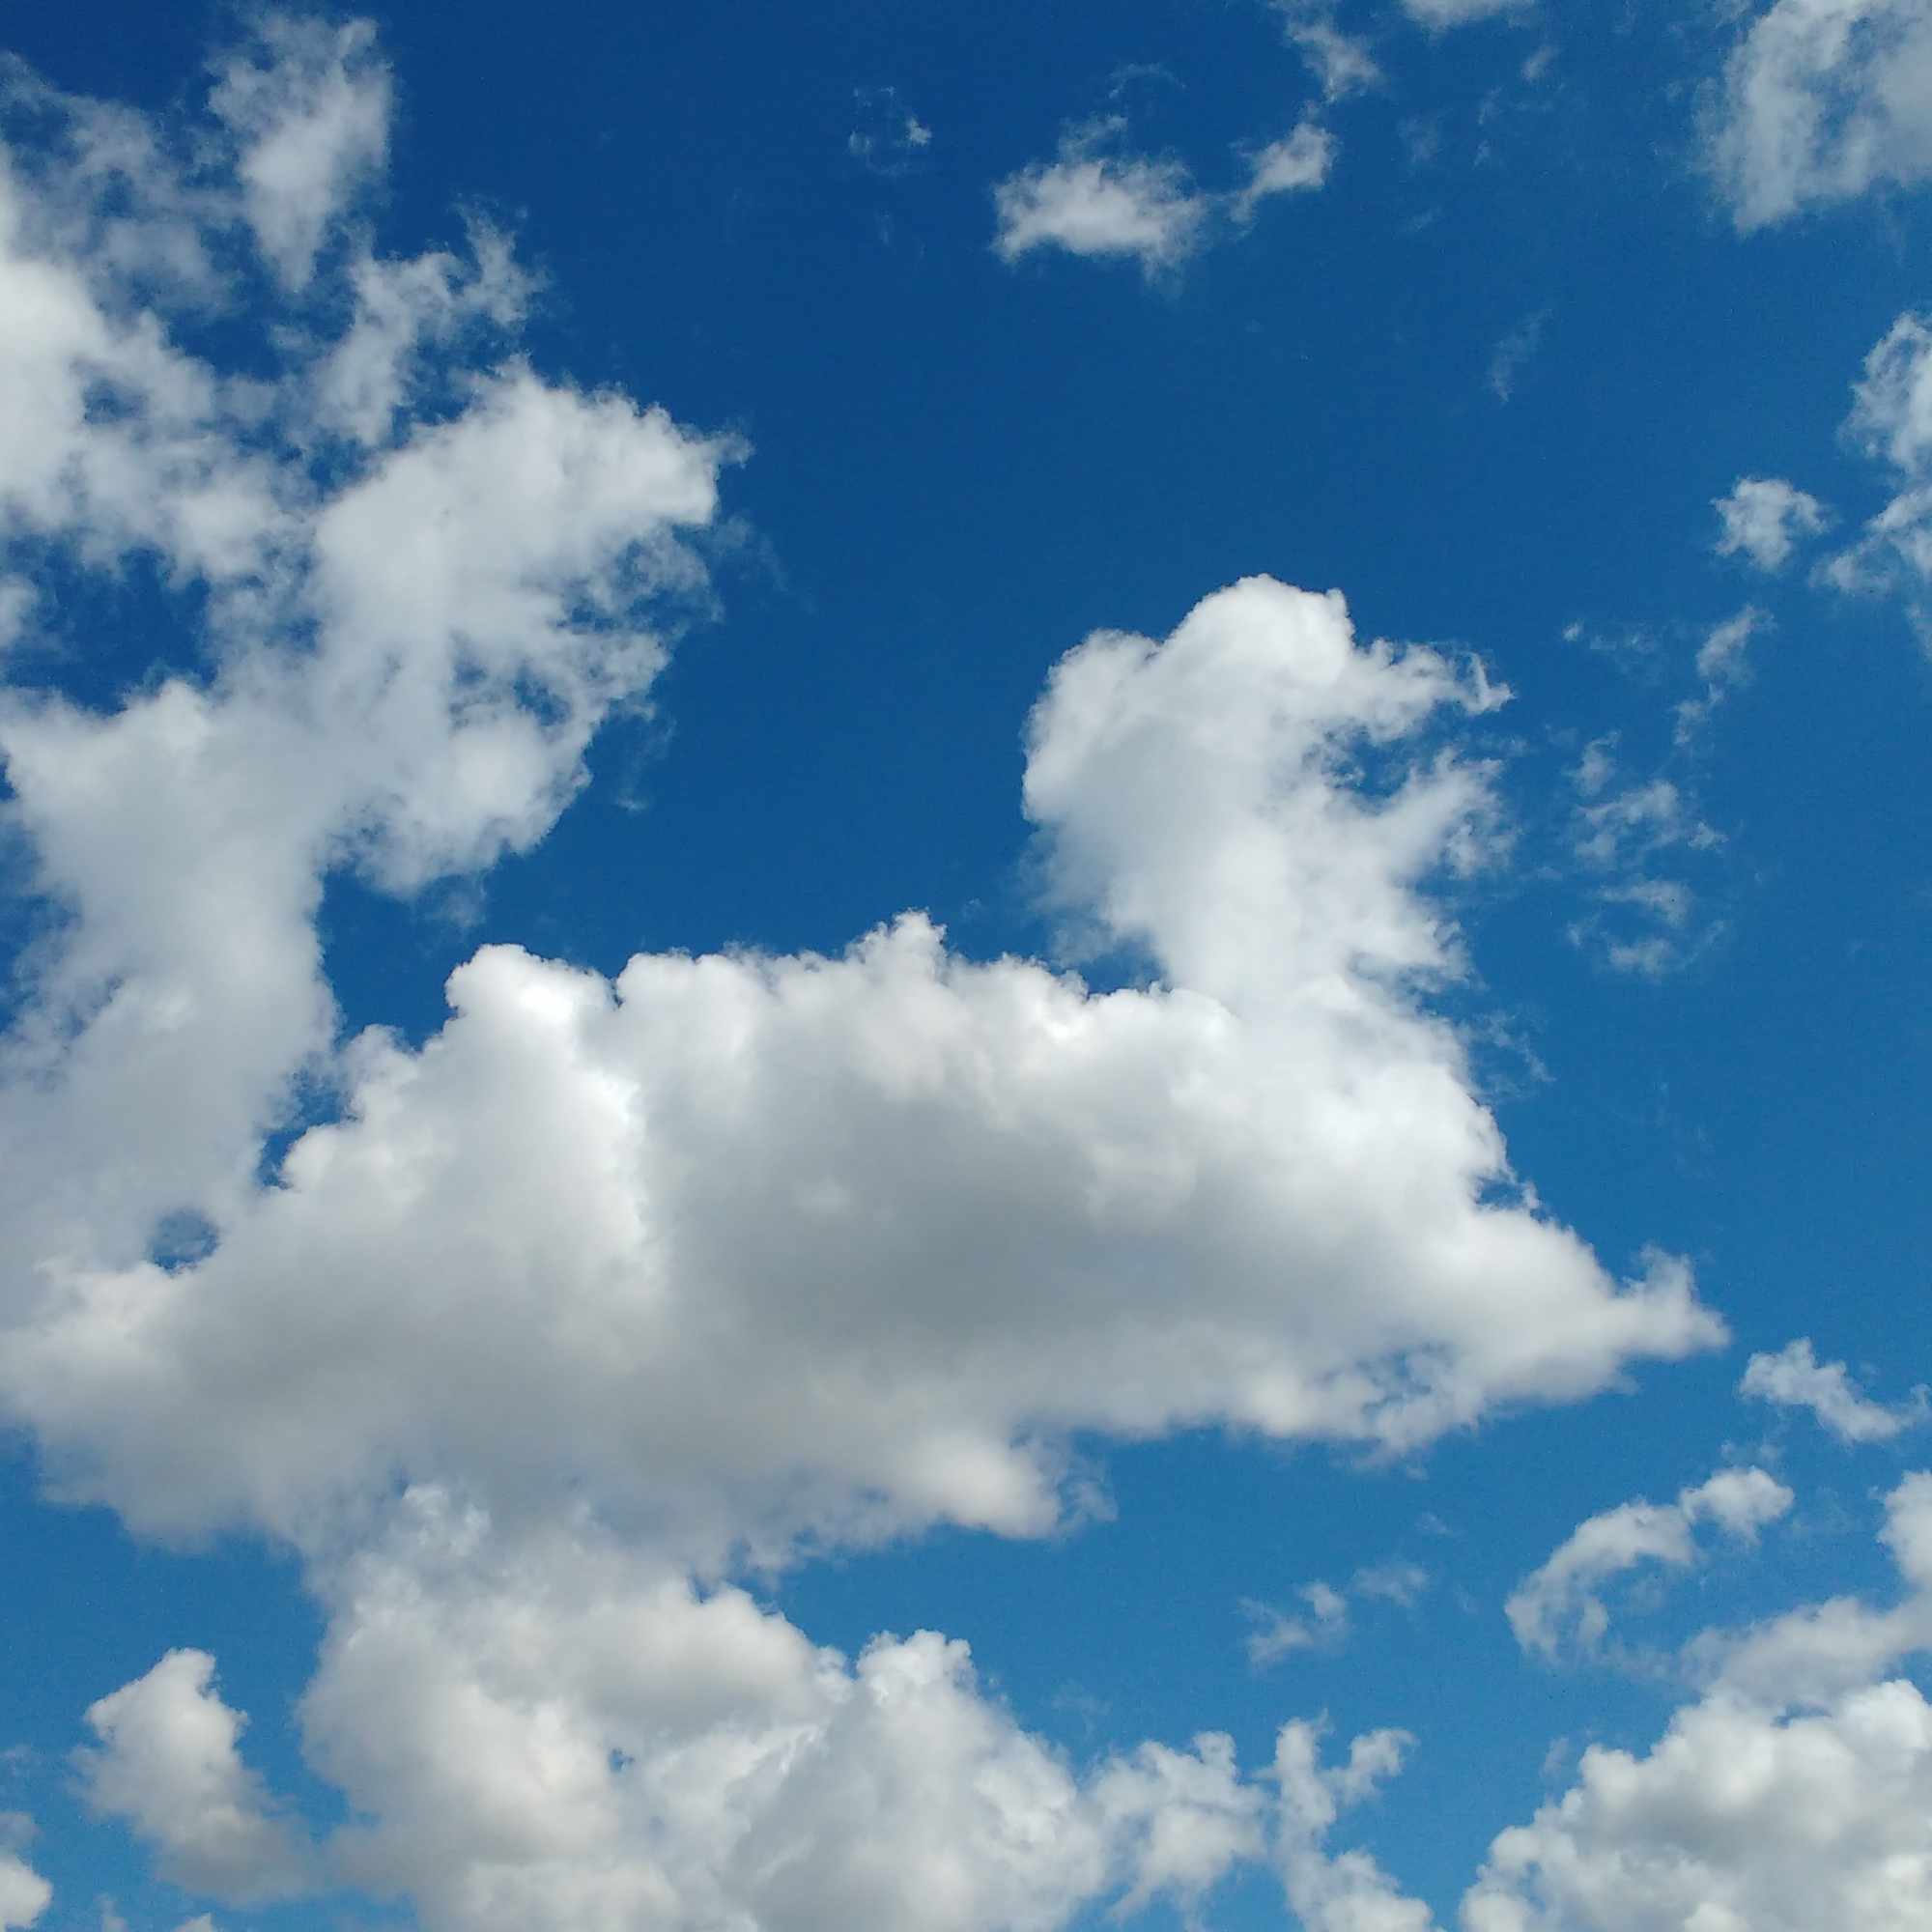 A photograph of some clouds, to demonstrate how the CookieCutter stack works.